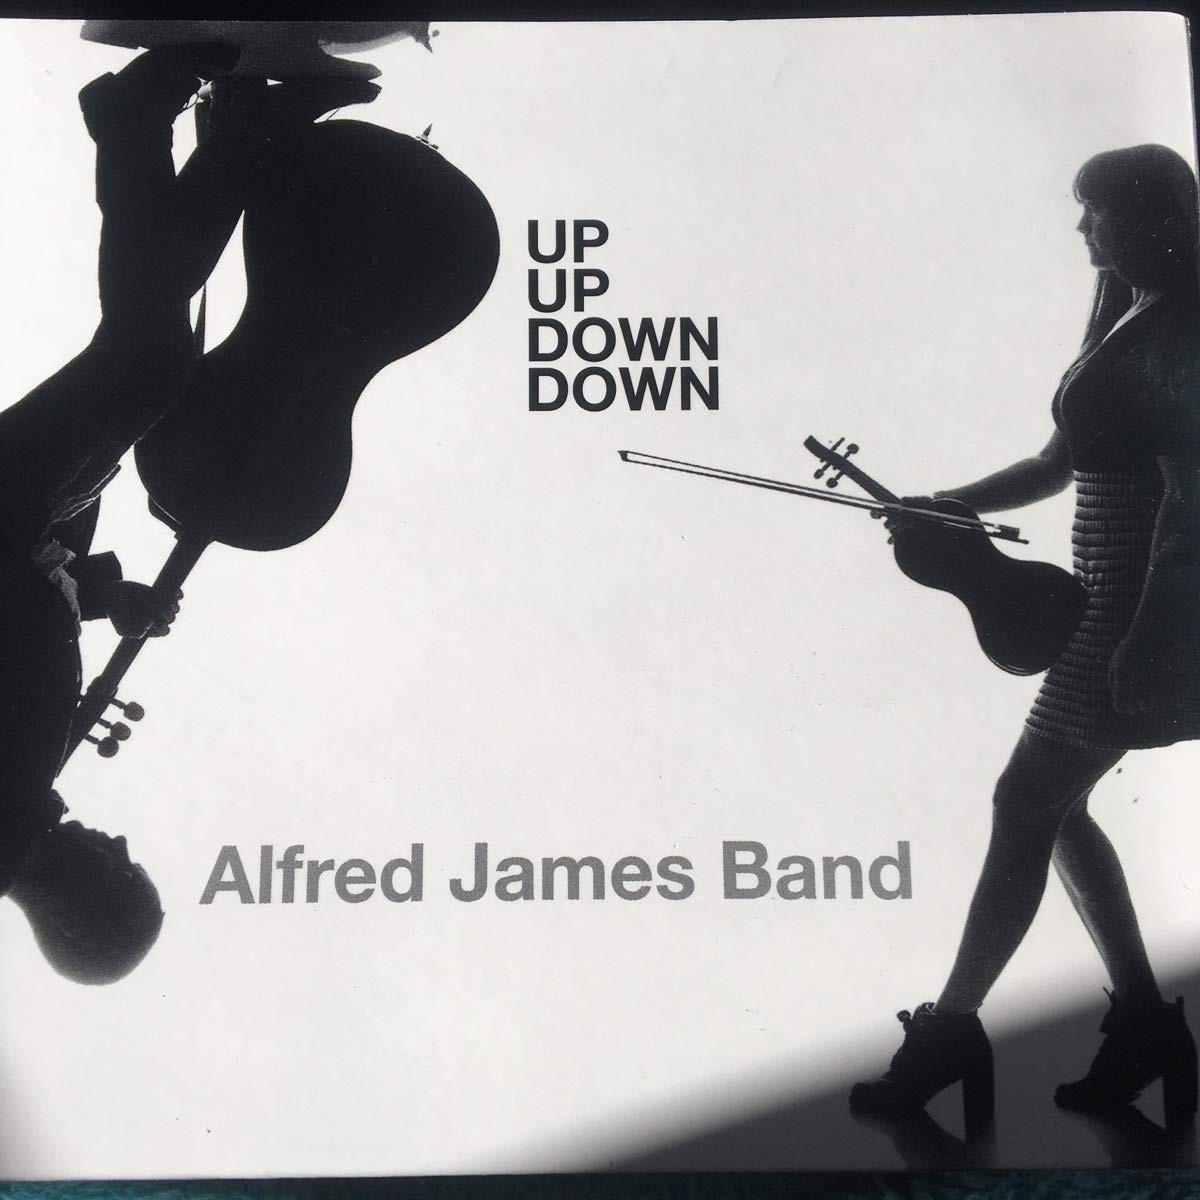 Alfred James Band - Up Up Down Down